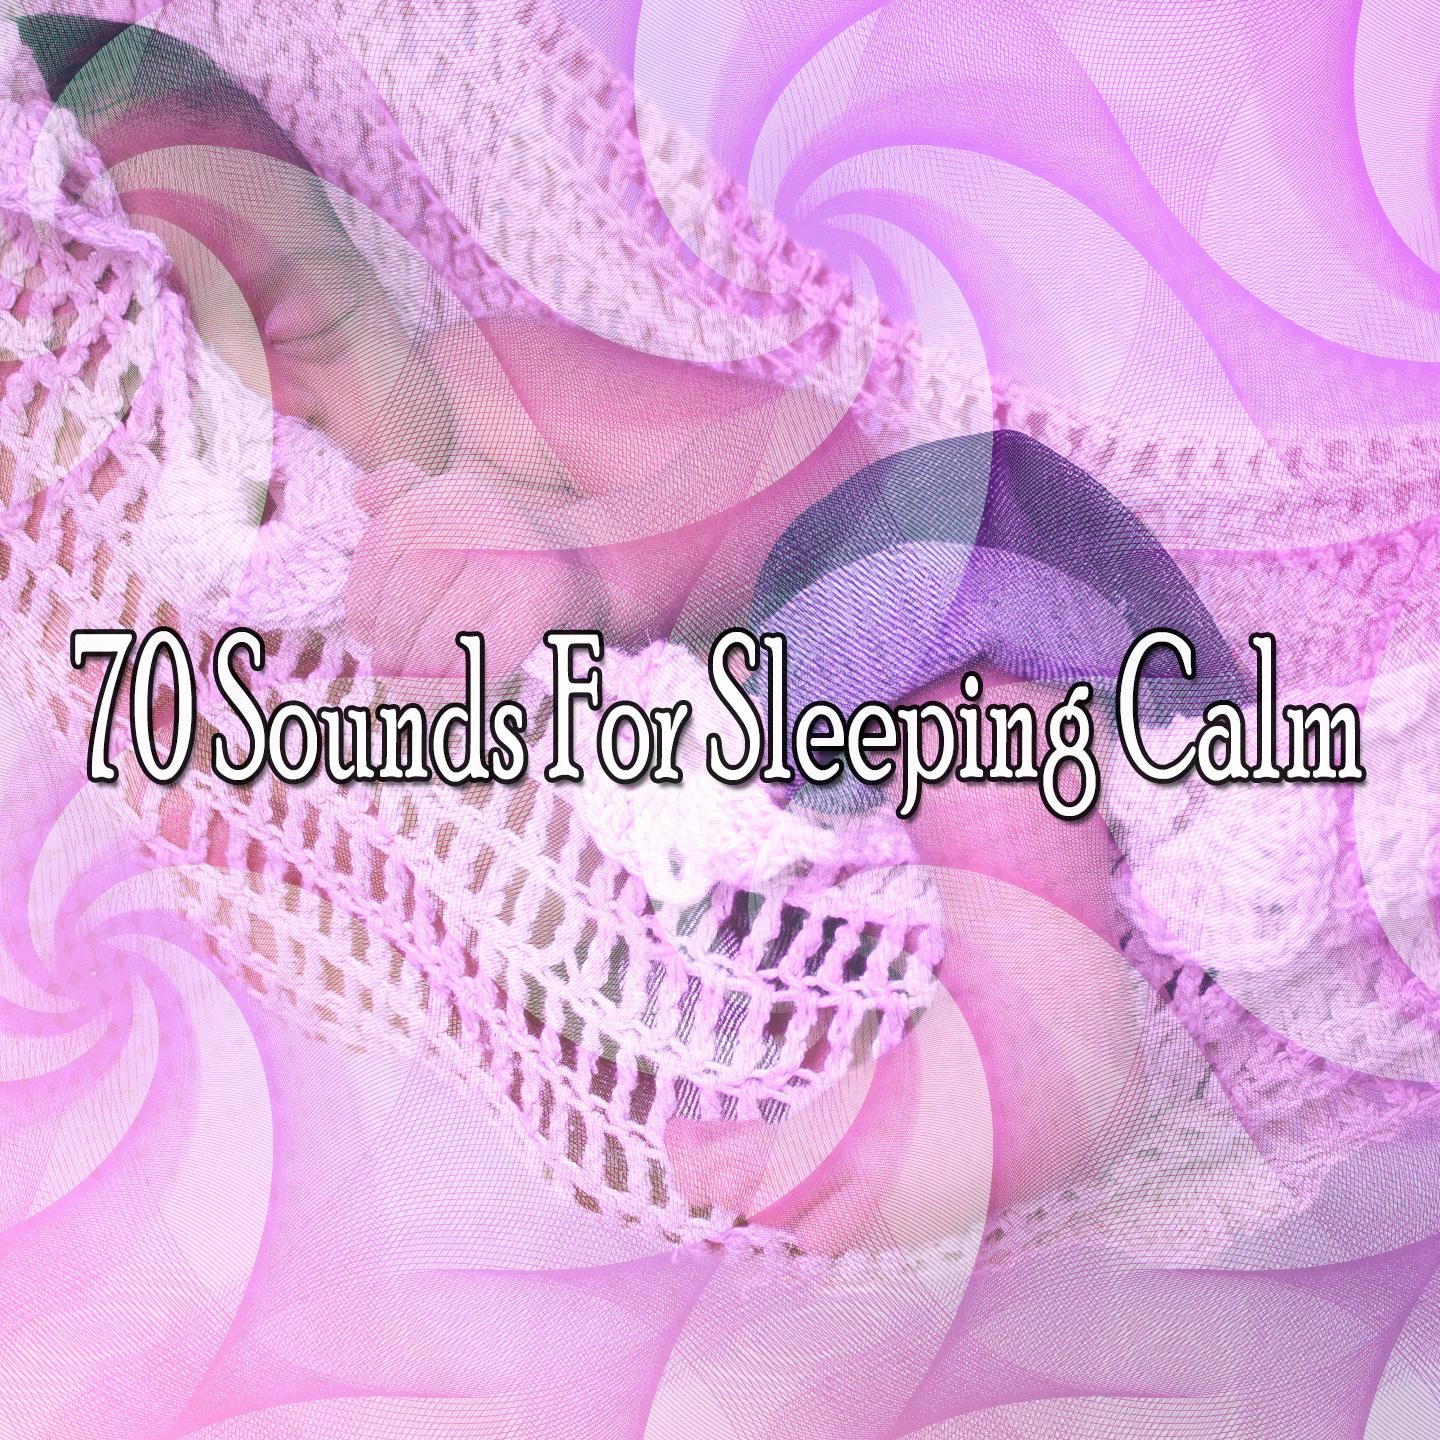 70 Sounds For Sleeping Calm